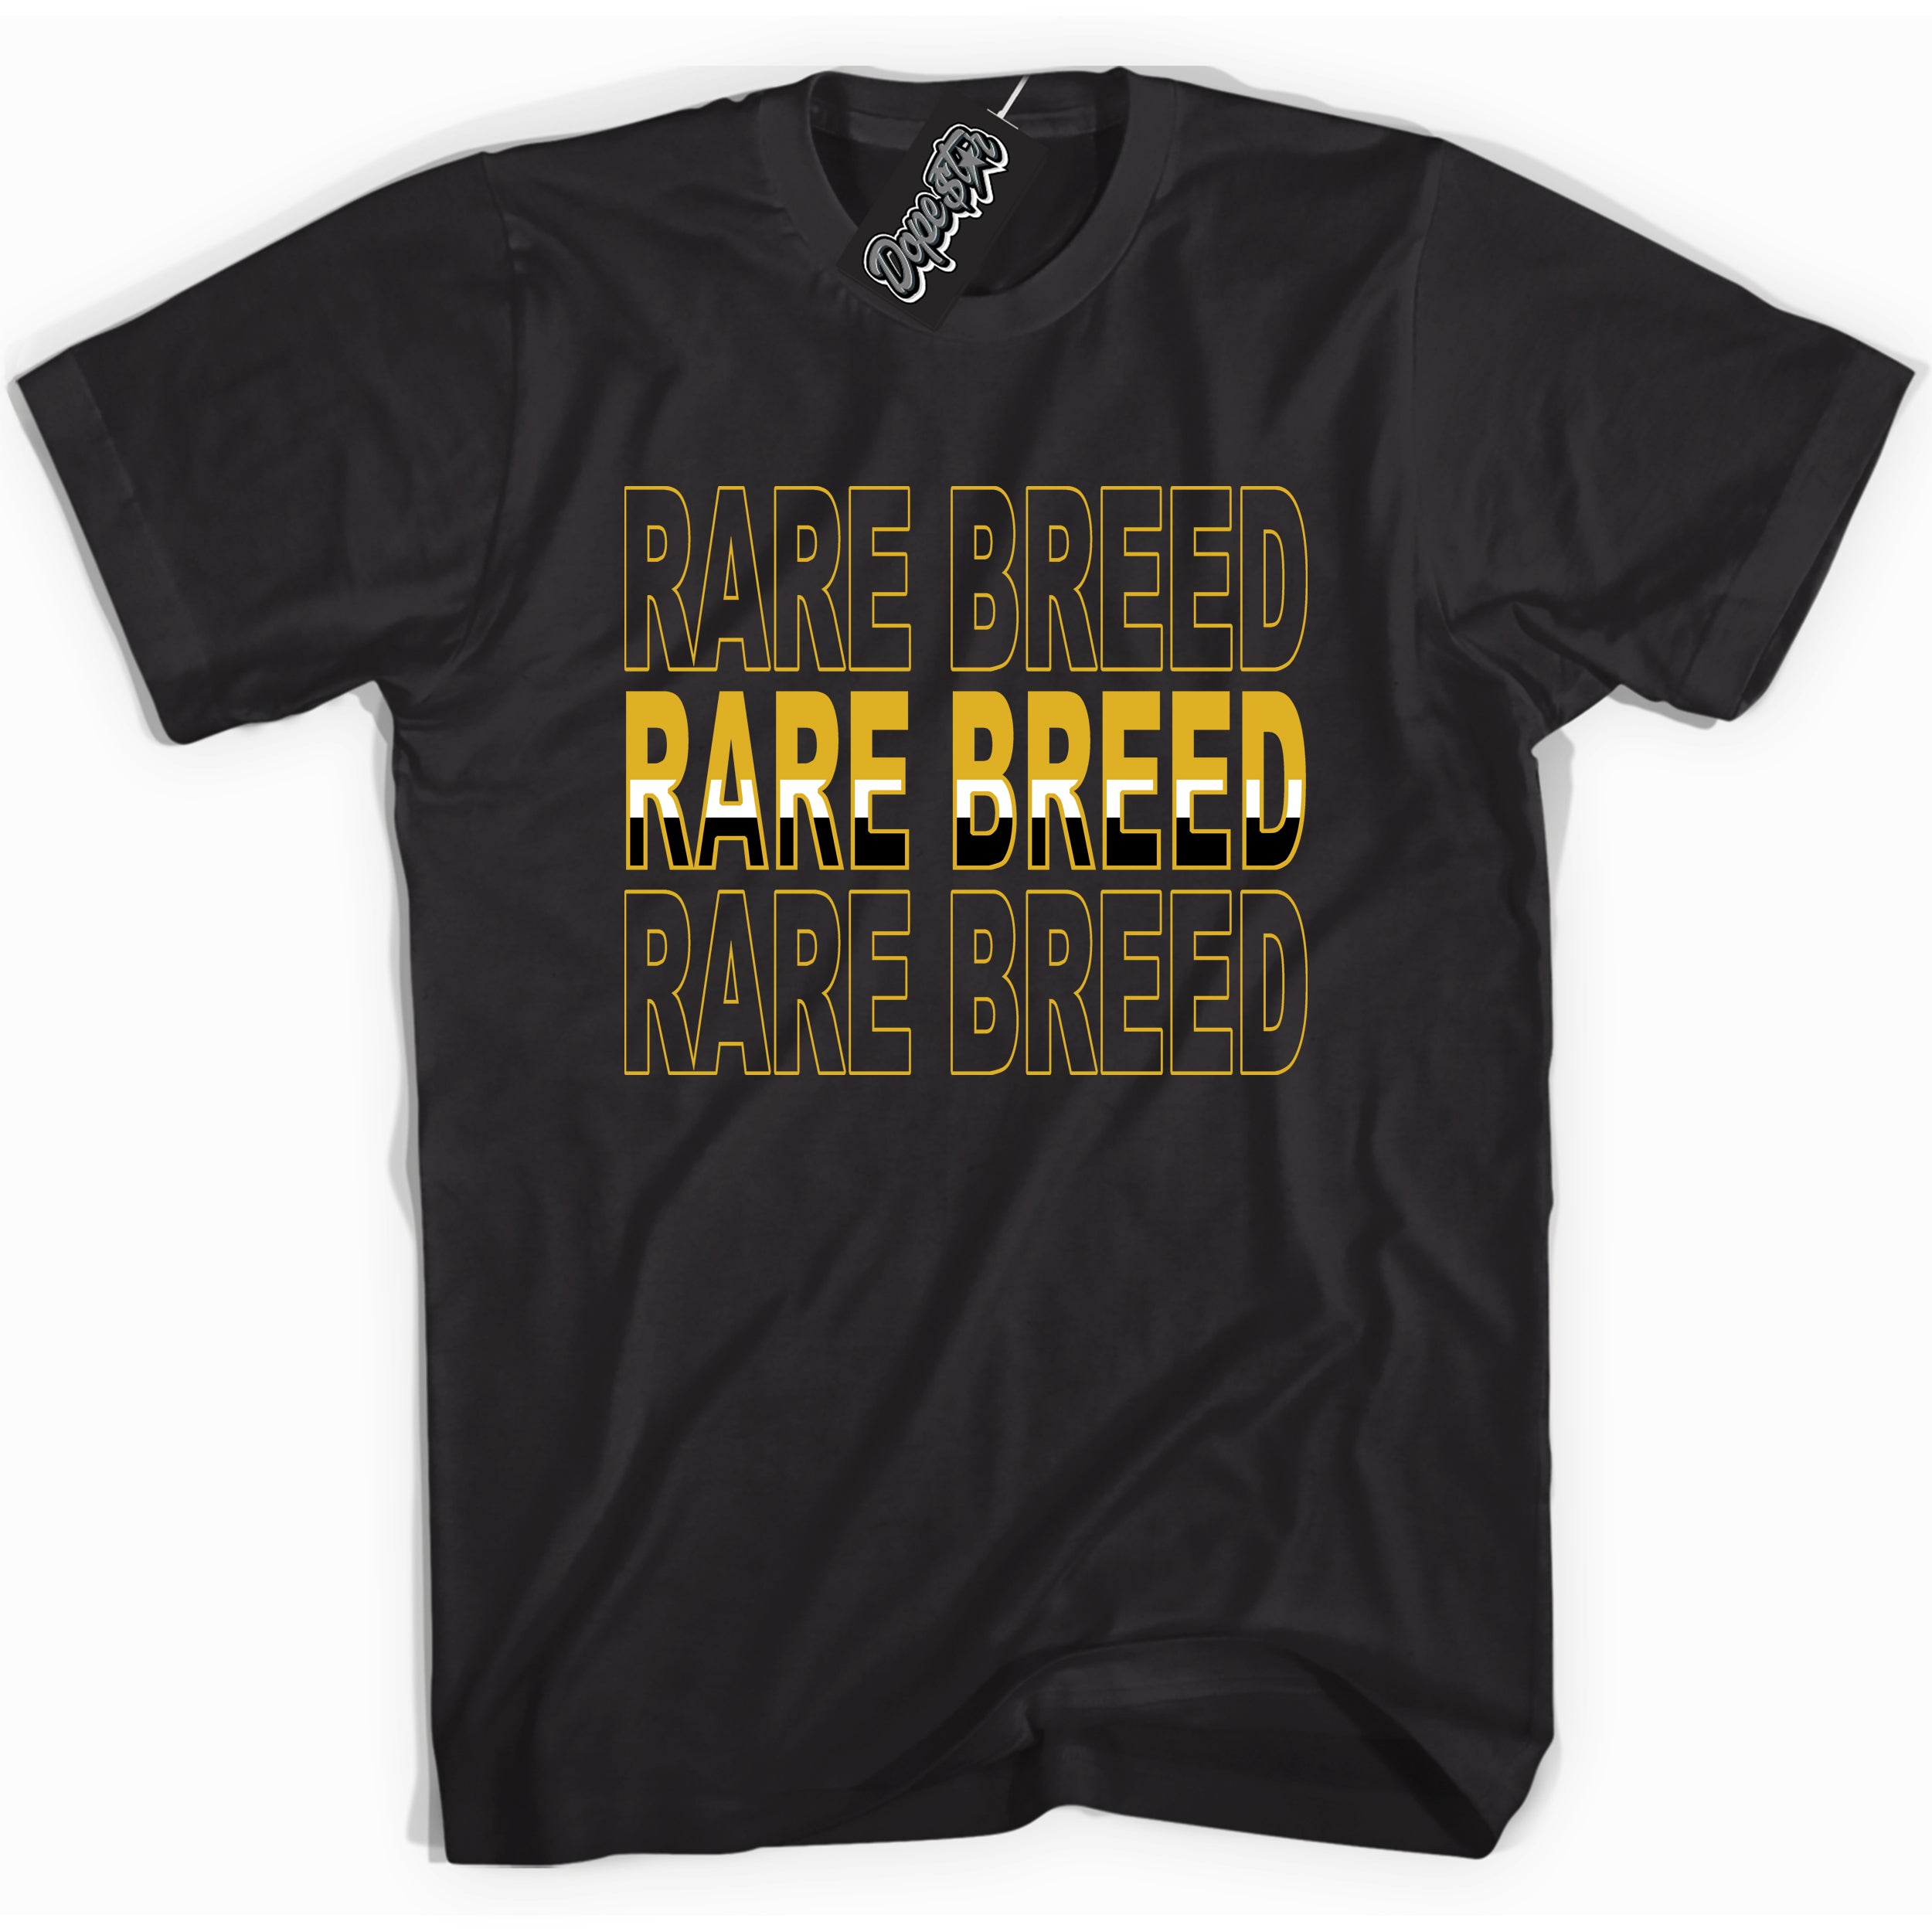 Cool Black Shirt with “ Rare Breed” design that perfectly matches Yellow Ochre 6s Sneakers.